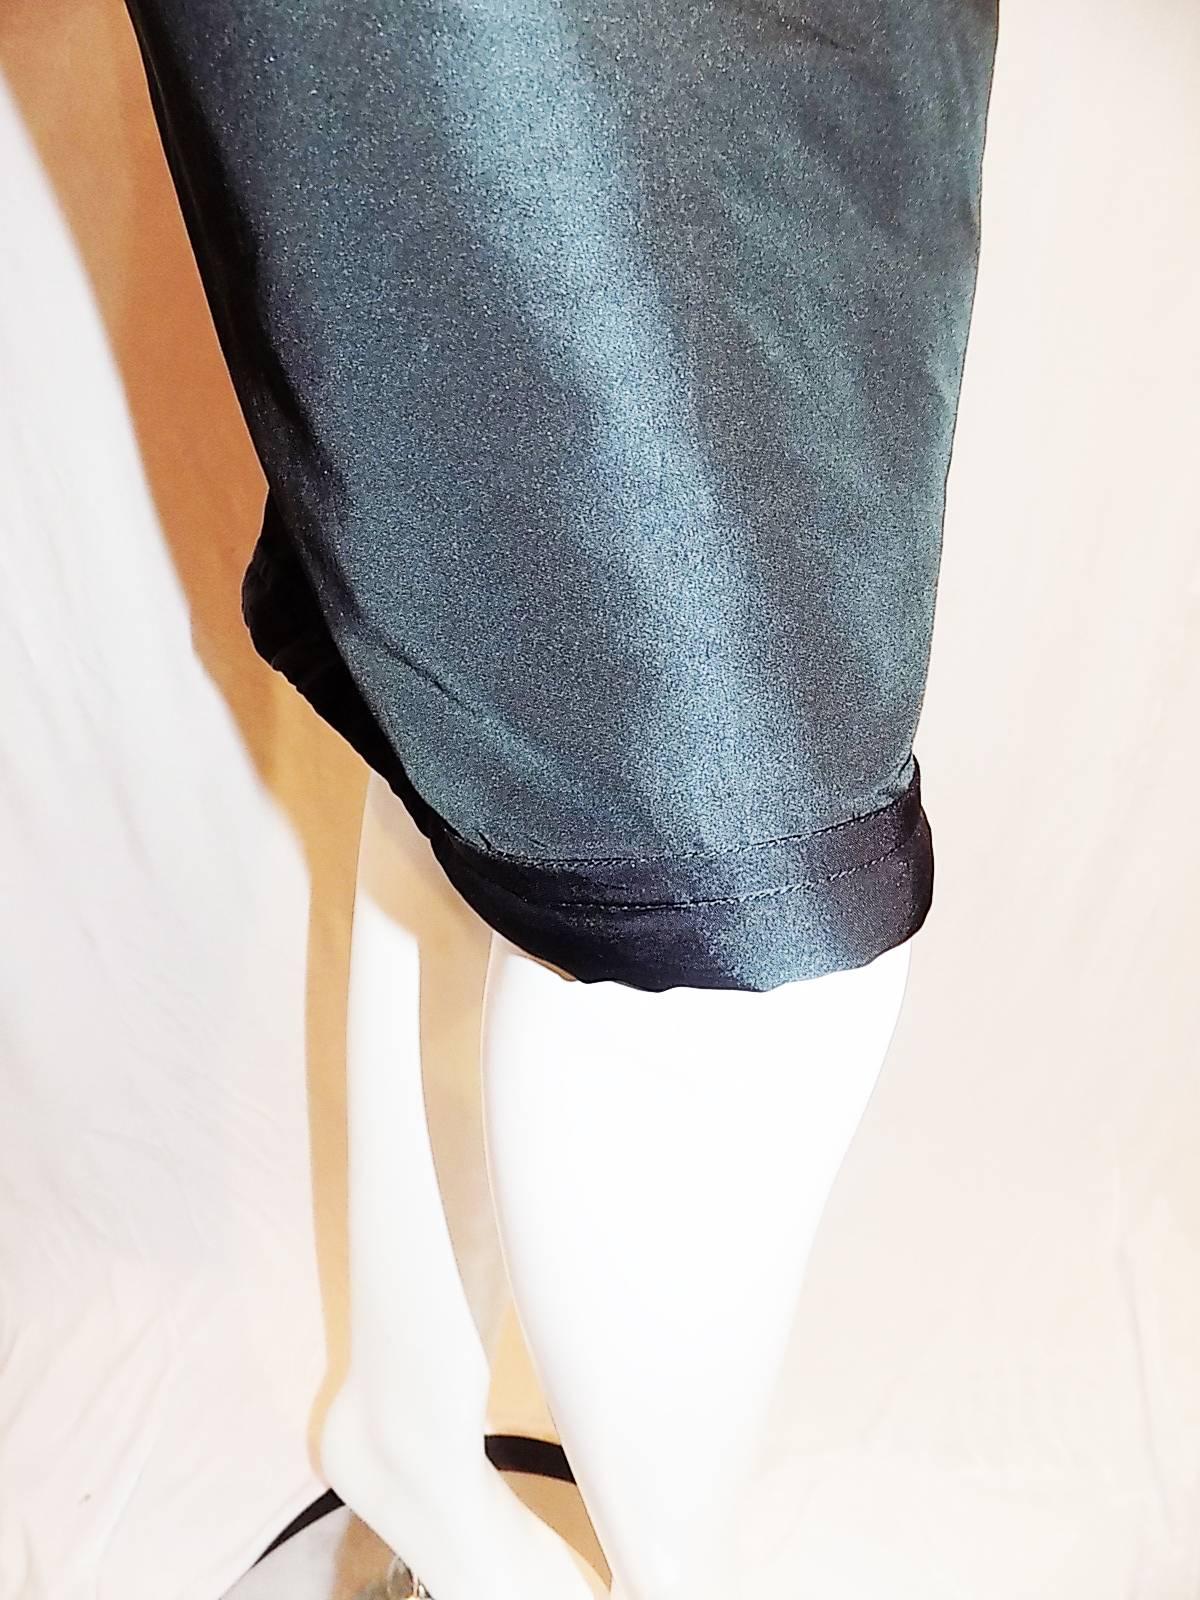 Lanvin black evening skirt In New Condition For Sale In New York, NY